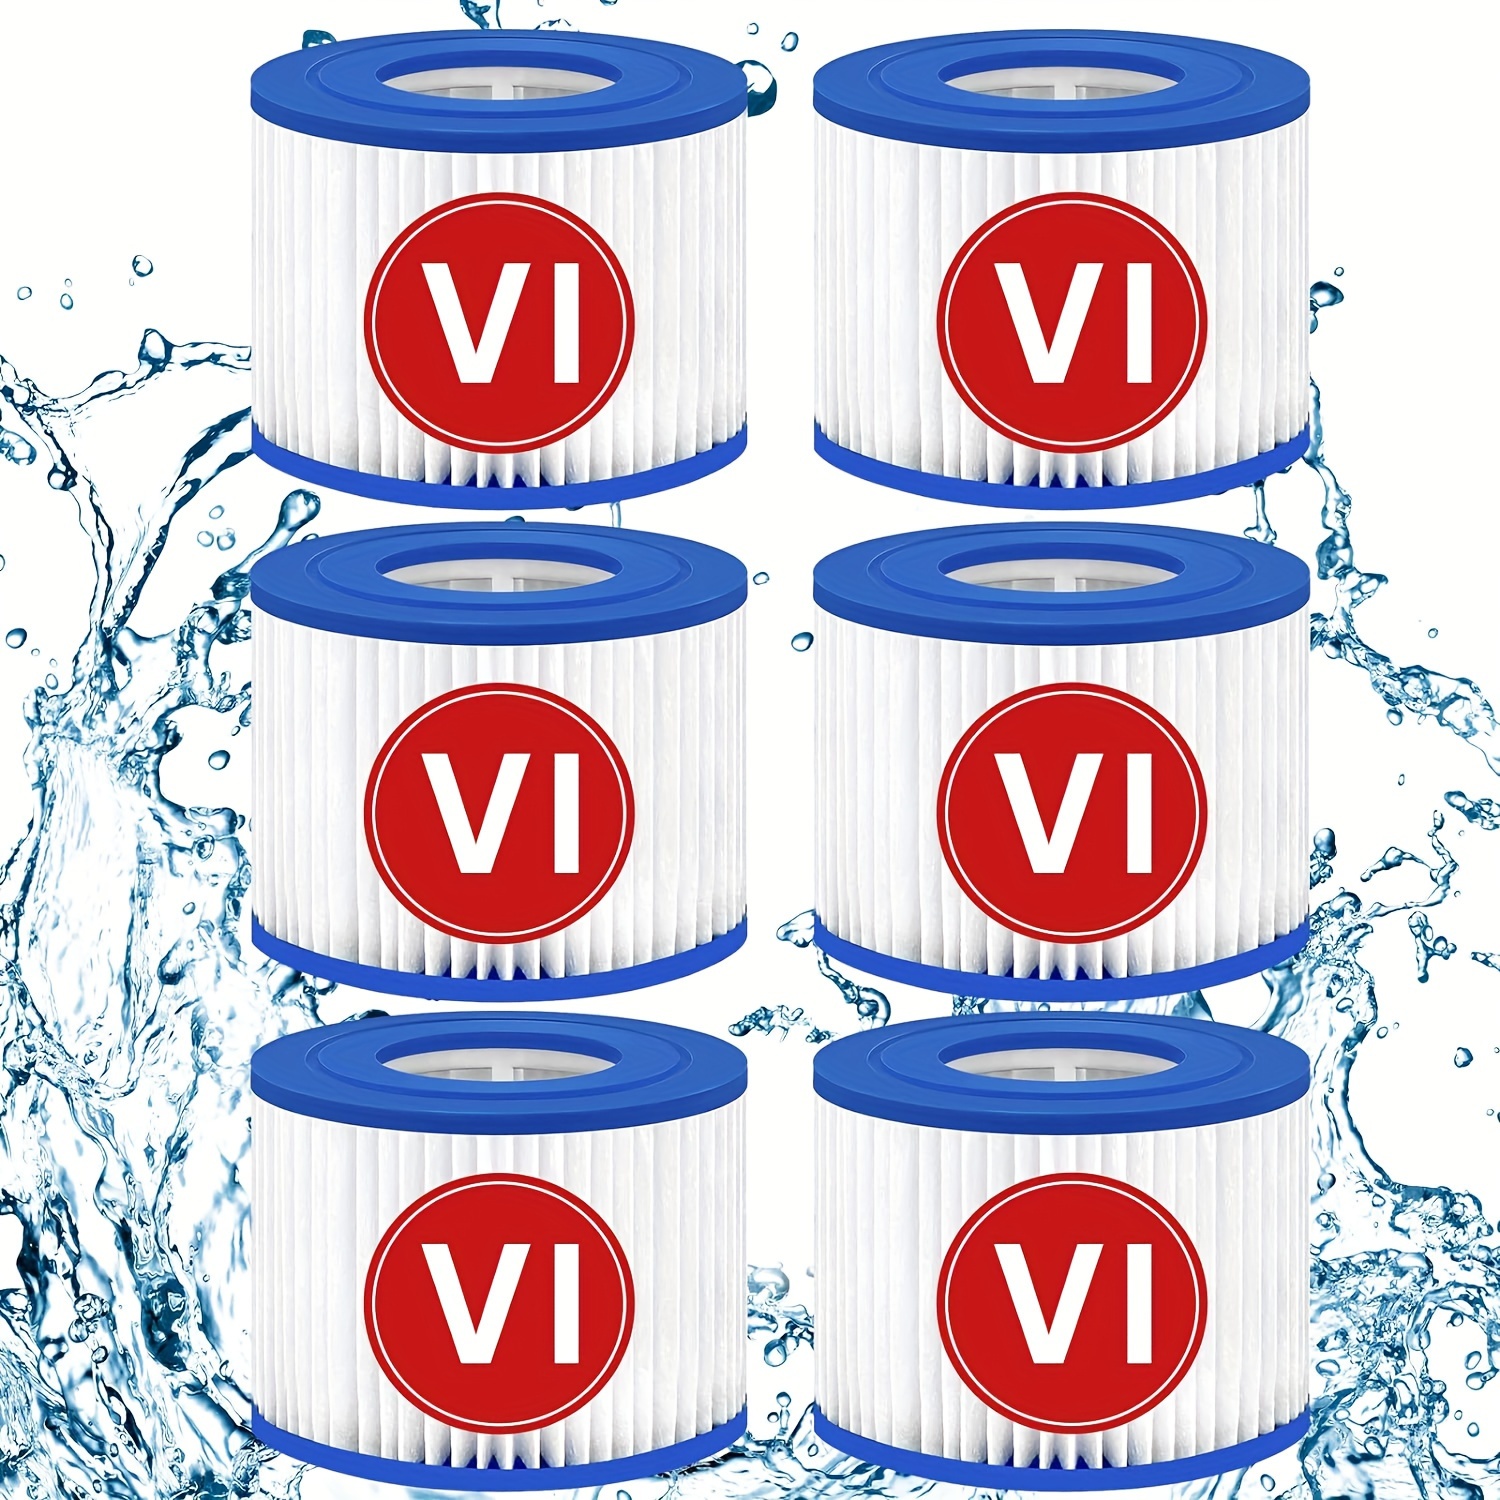 

6 Pack Type Vi Spa Filters, Hot Tub Filter Pool Filter Cartridge Replacement For Coleman Saluspa, Bestway, Lay-z-spa